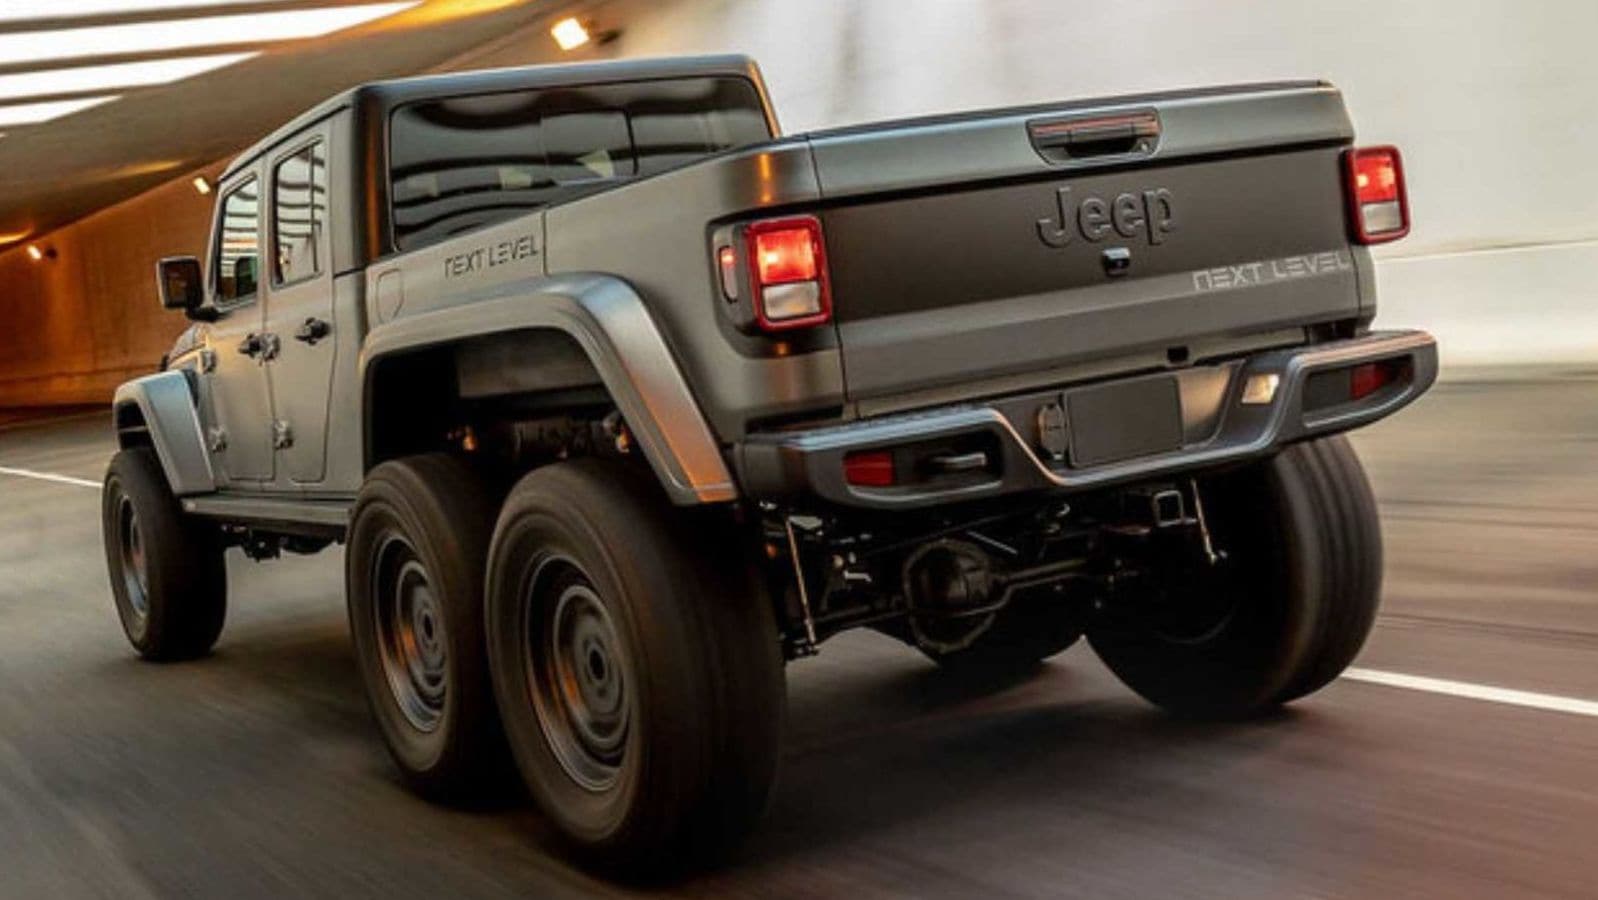 This Jeep Gladiator 6x6 by Next level makes 4x4 passe | HT Auto